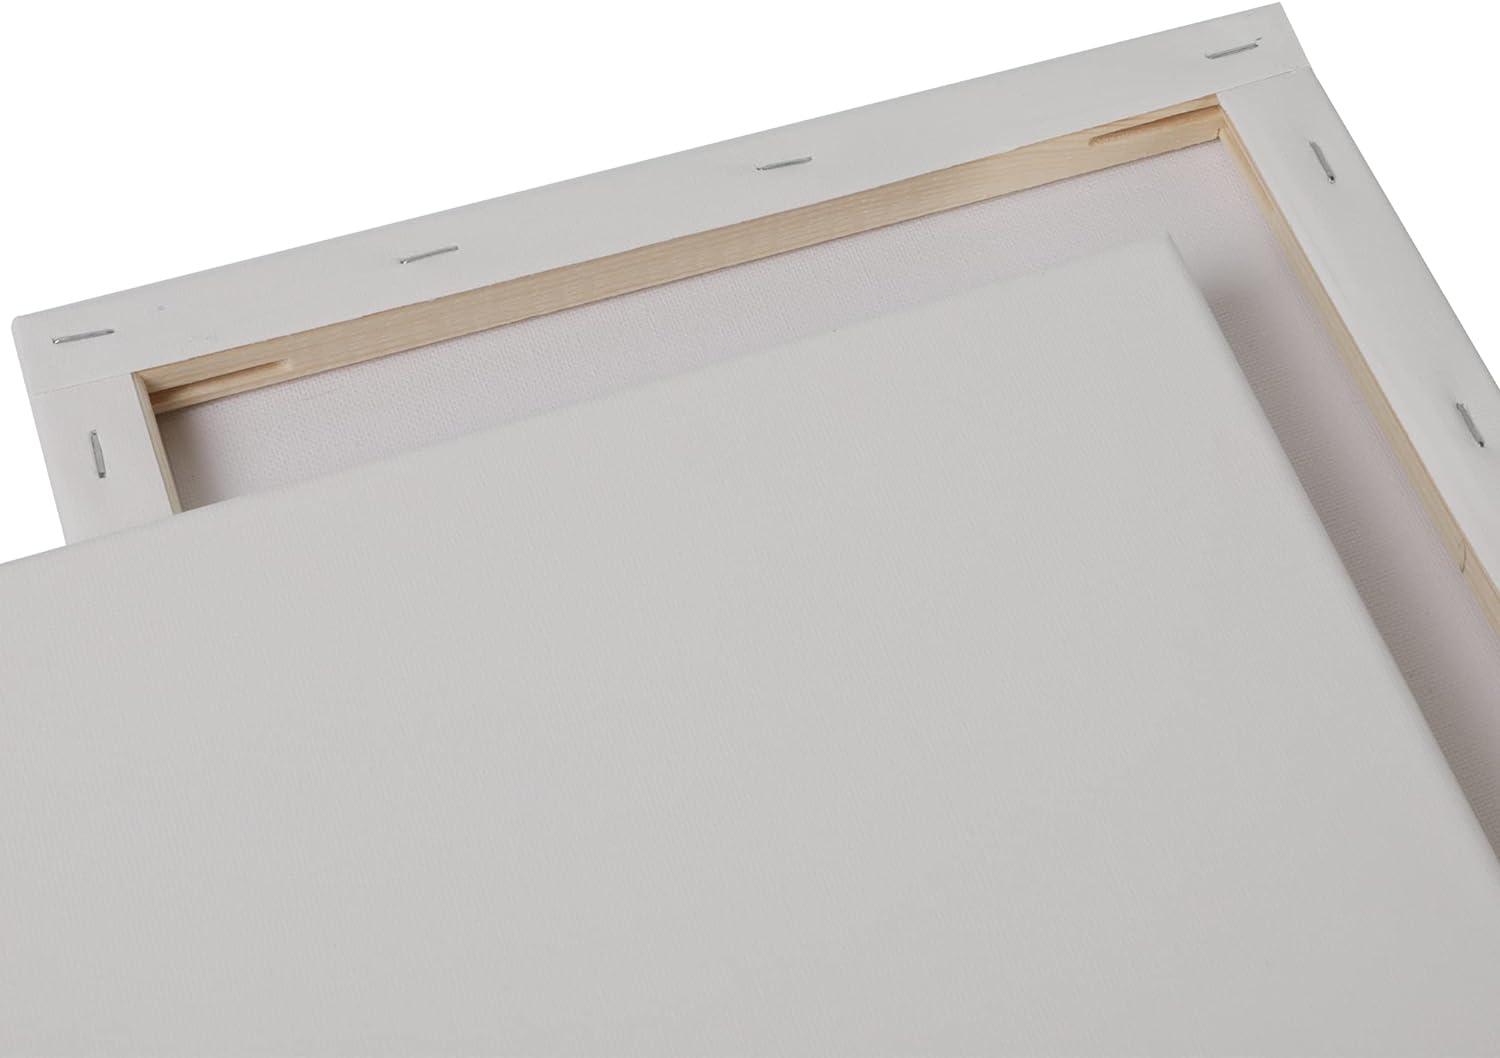 Canvas Panels 6x6 Inch 12-Pack, 10 oz Double Primed Acid-Free 100% Cotton  Blank Canvases for Painting, Square Flat Canvas Board for Oil Acrylics